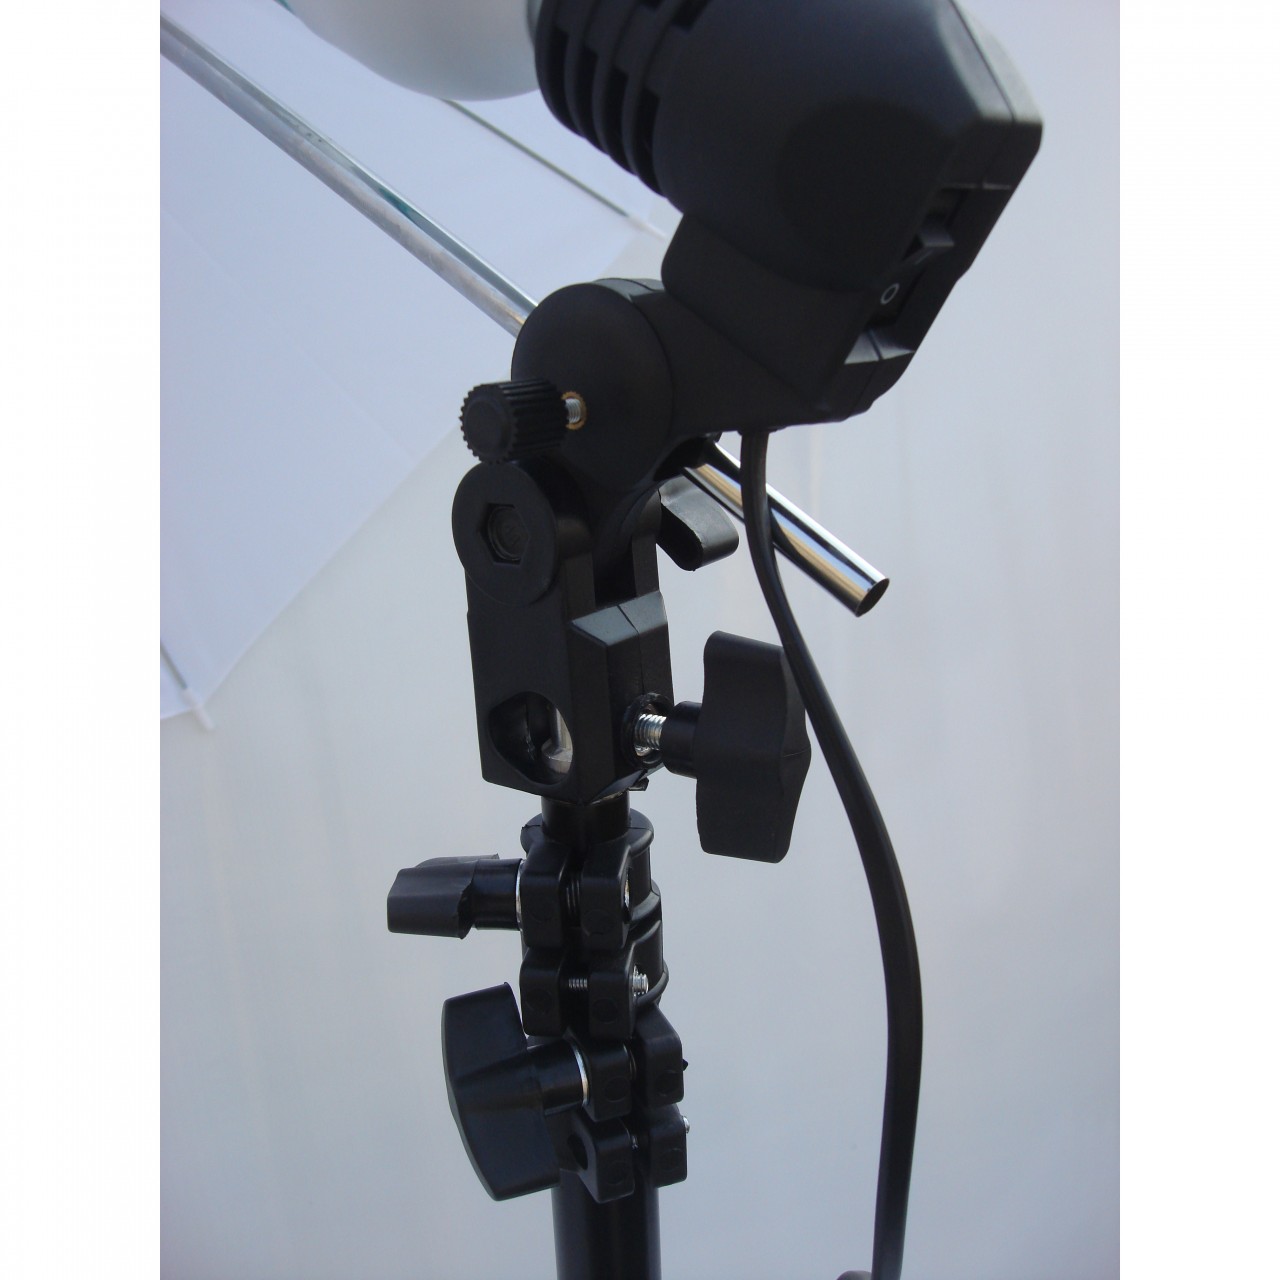 Umbrella continuous Lights setup pair for photography and video shooting